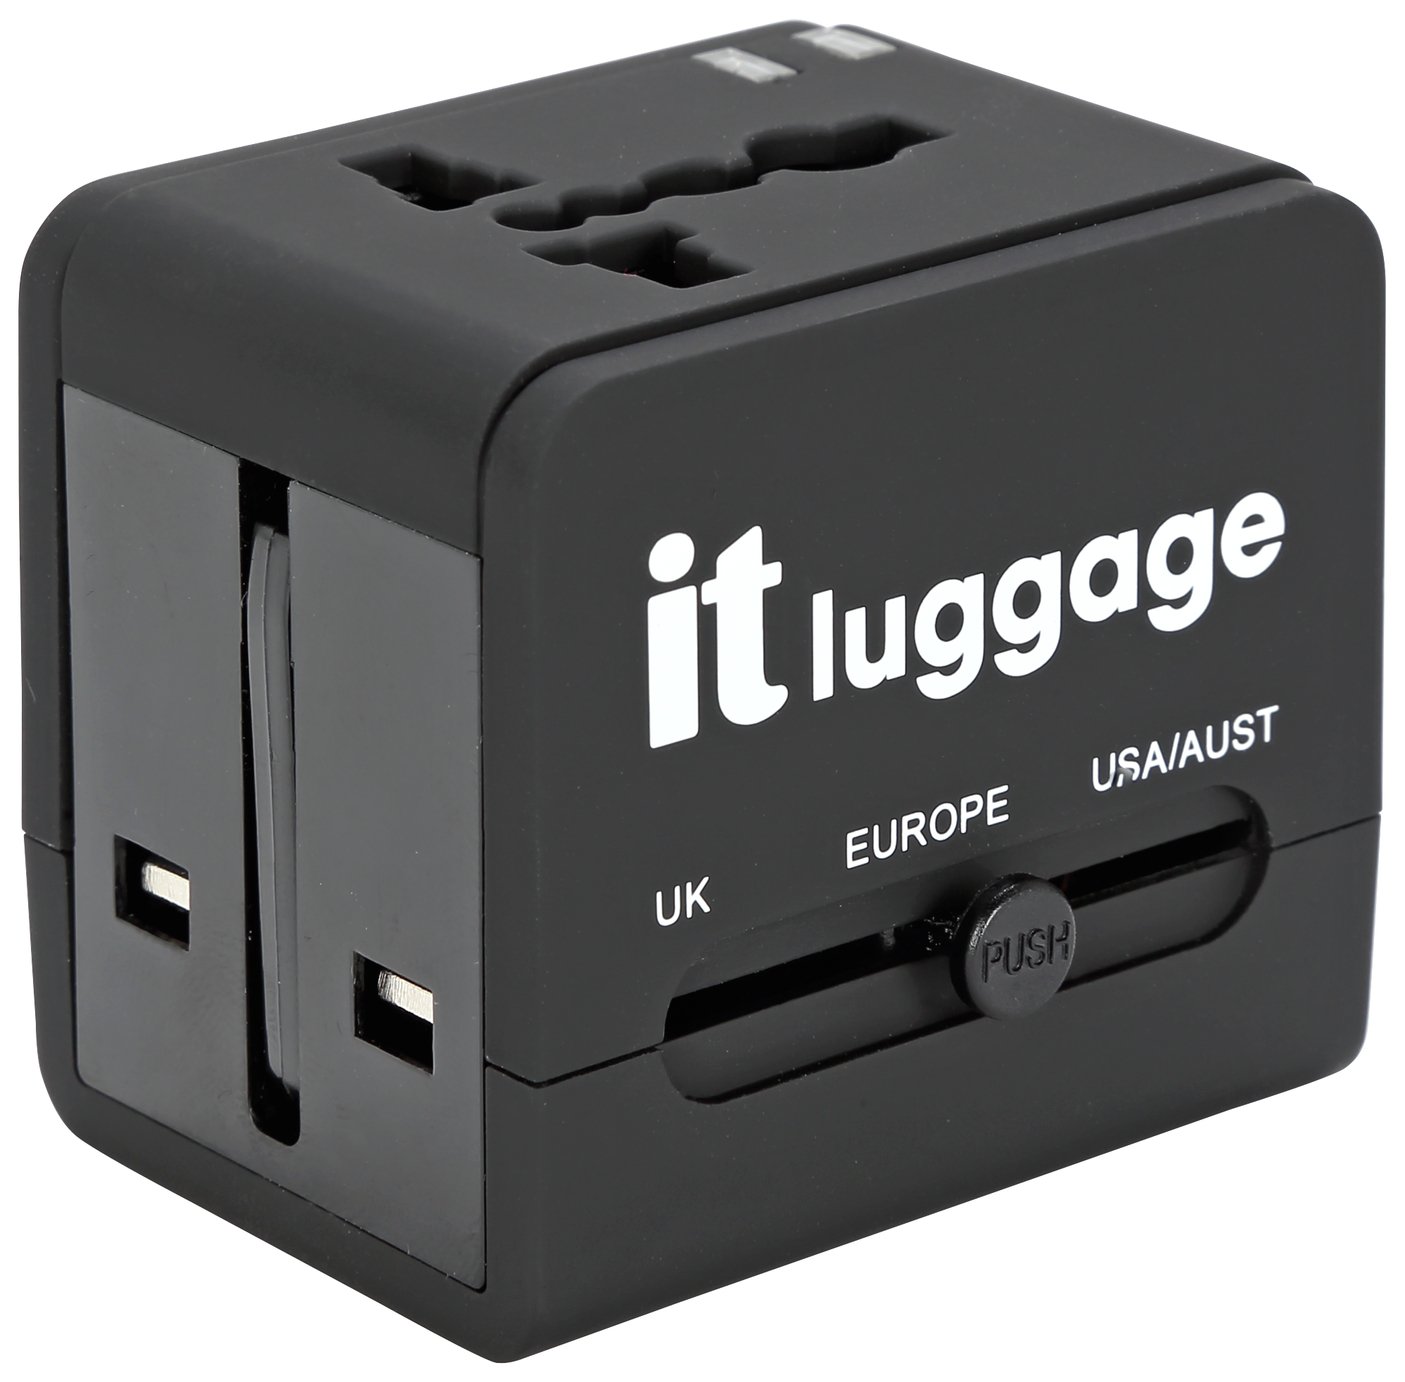 IT Luggage USB Travel Adaptor and Charger.